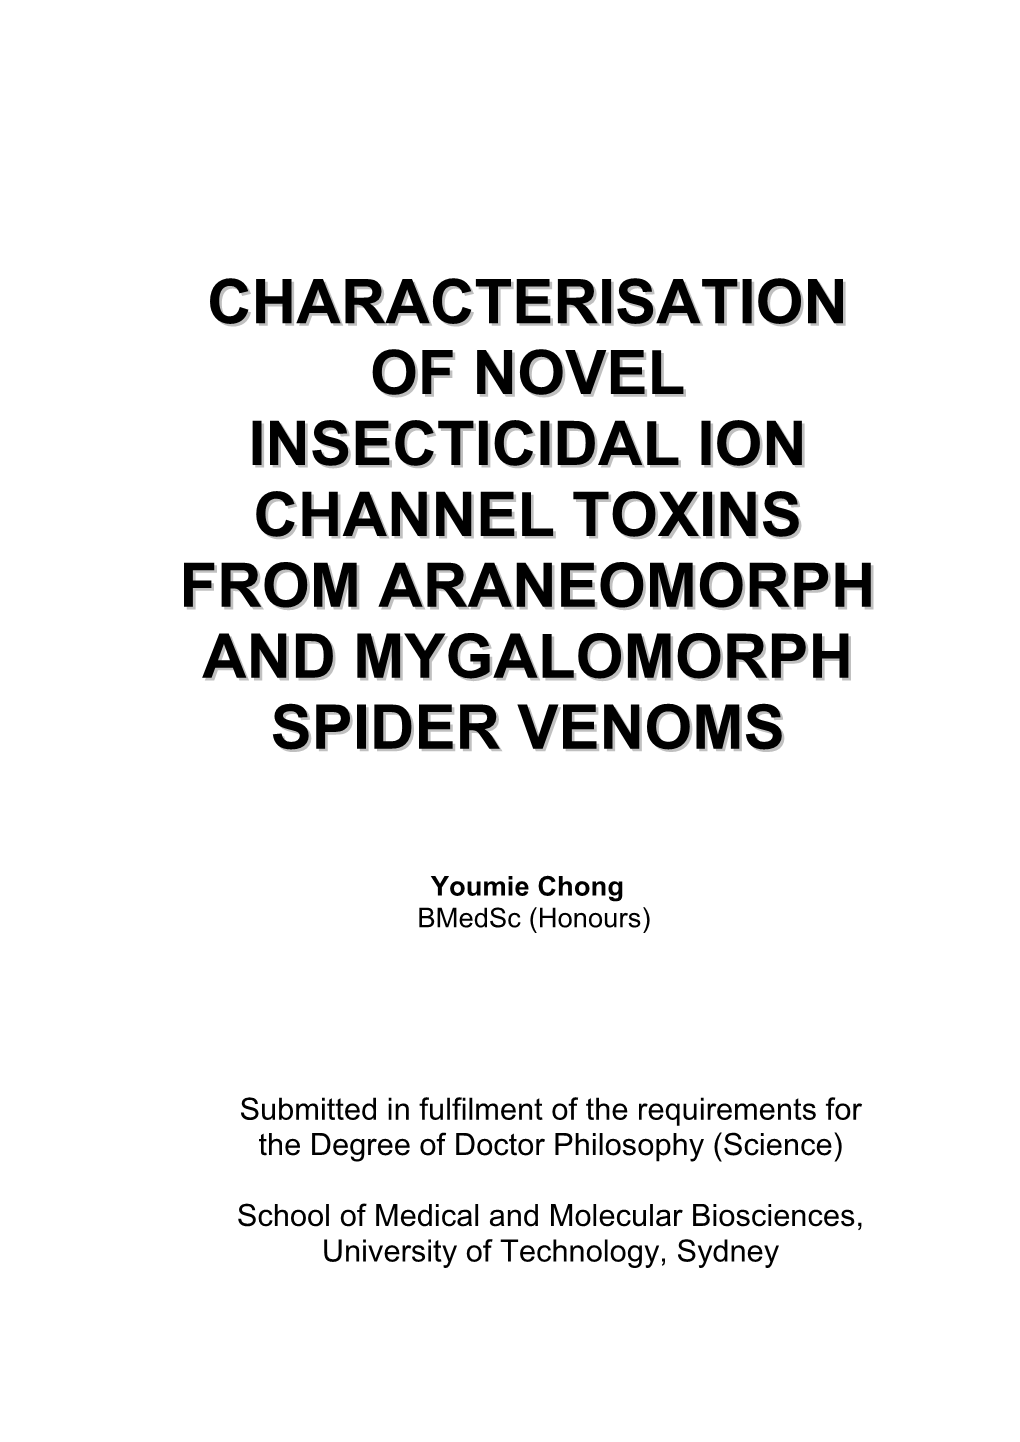 Characterisation of Novel Insecticidal Ion Channel Toxins From